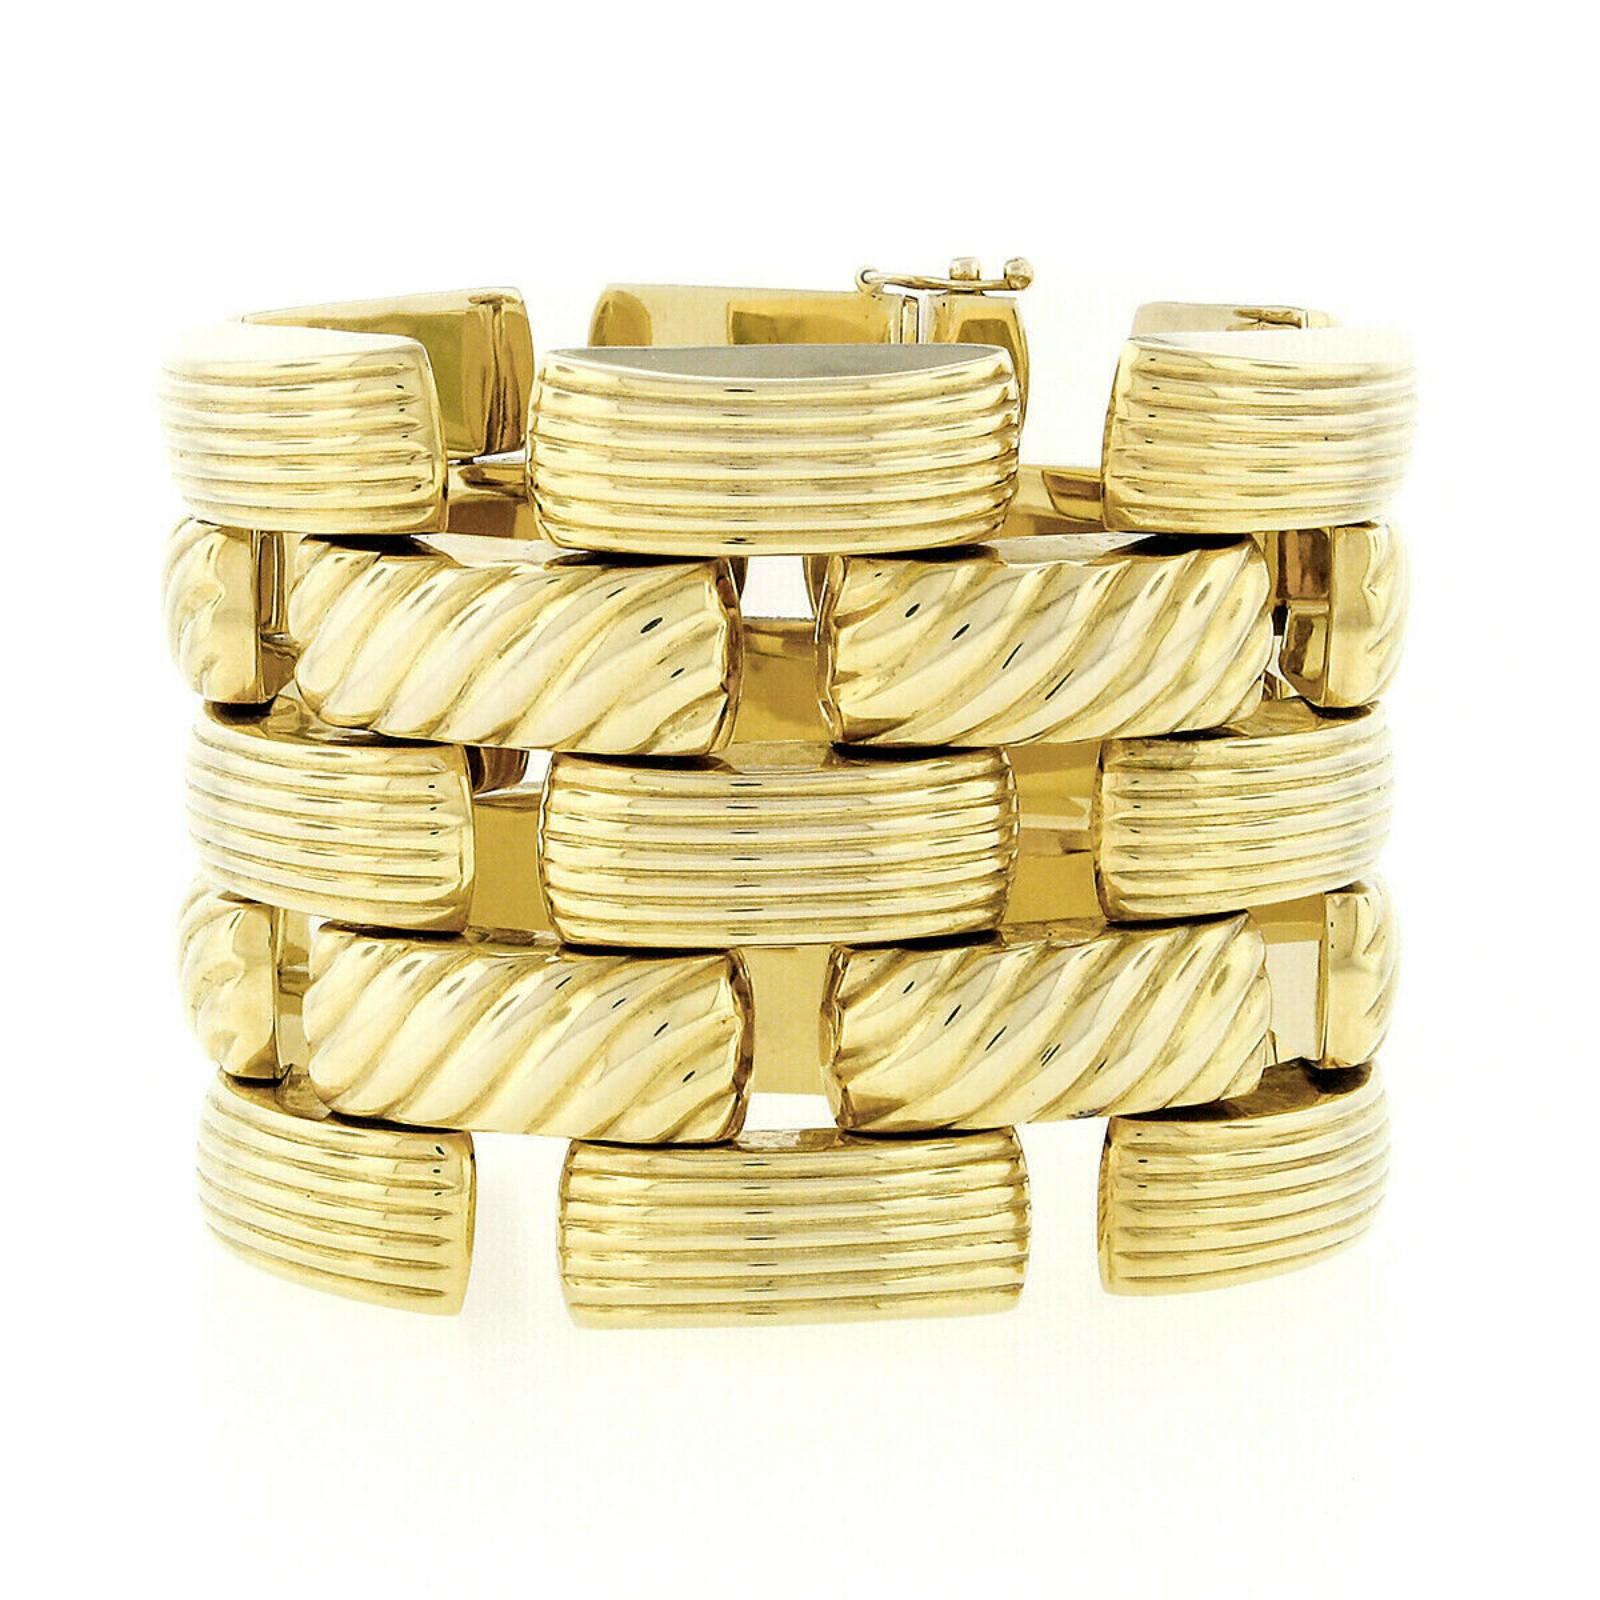 Here we have an incredible, large, and very wide vintage bracelet crafted from solid 14k yellow gold. This heavy and well made bracelet is structured from numerous alternating groove and cable link design that sit flexibly on the wrist with open